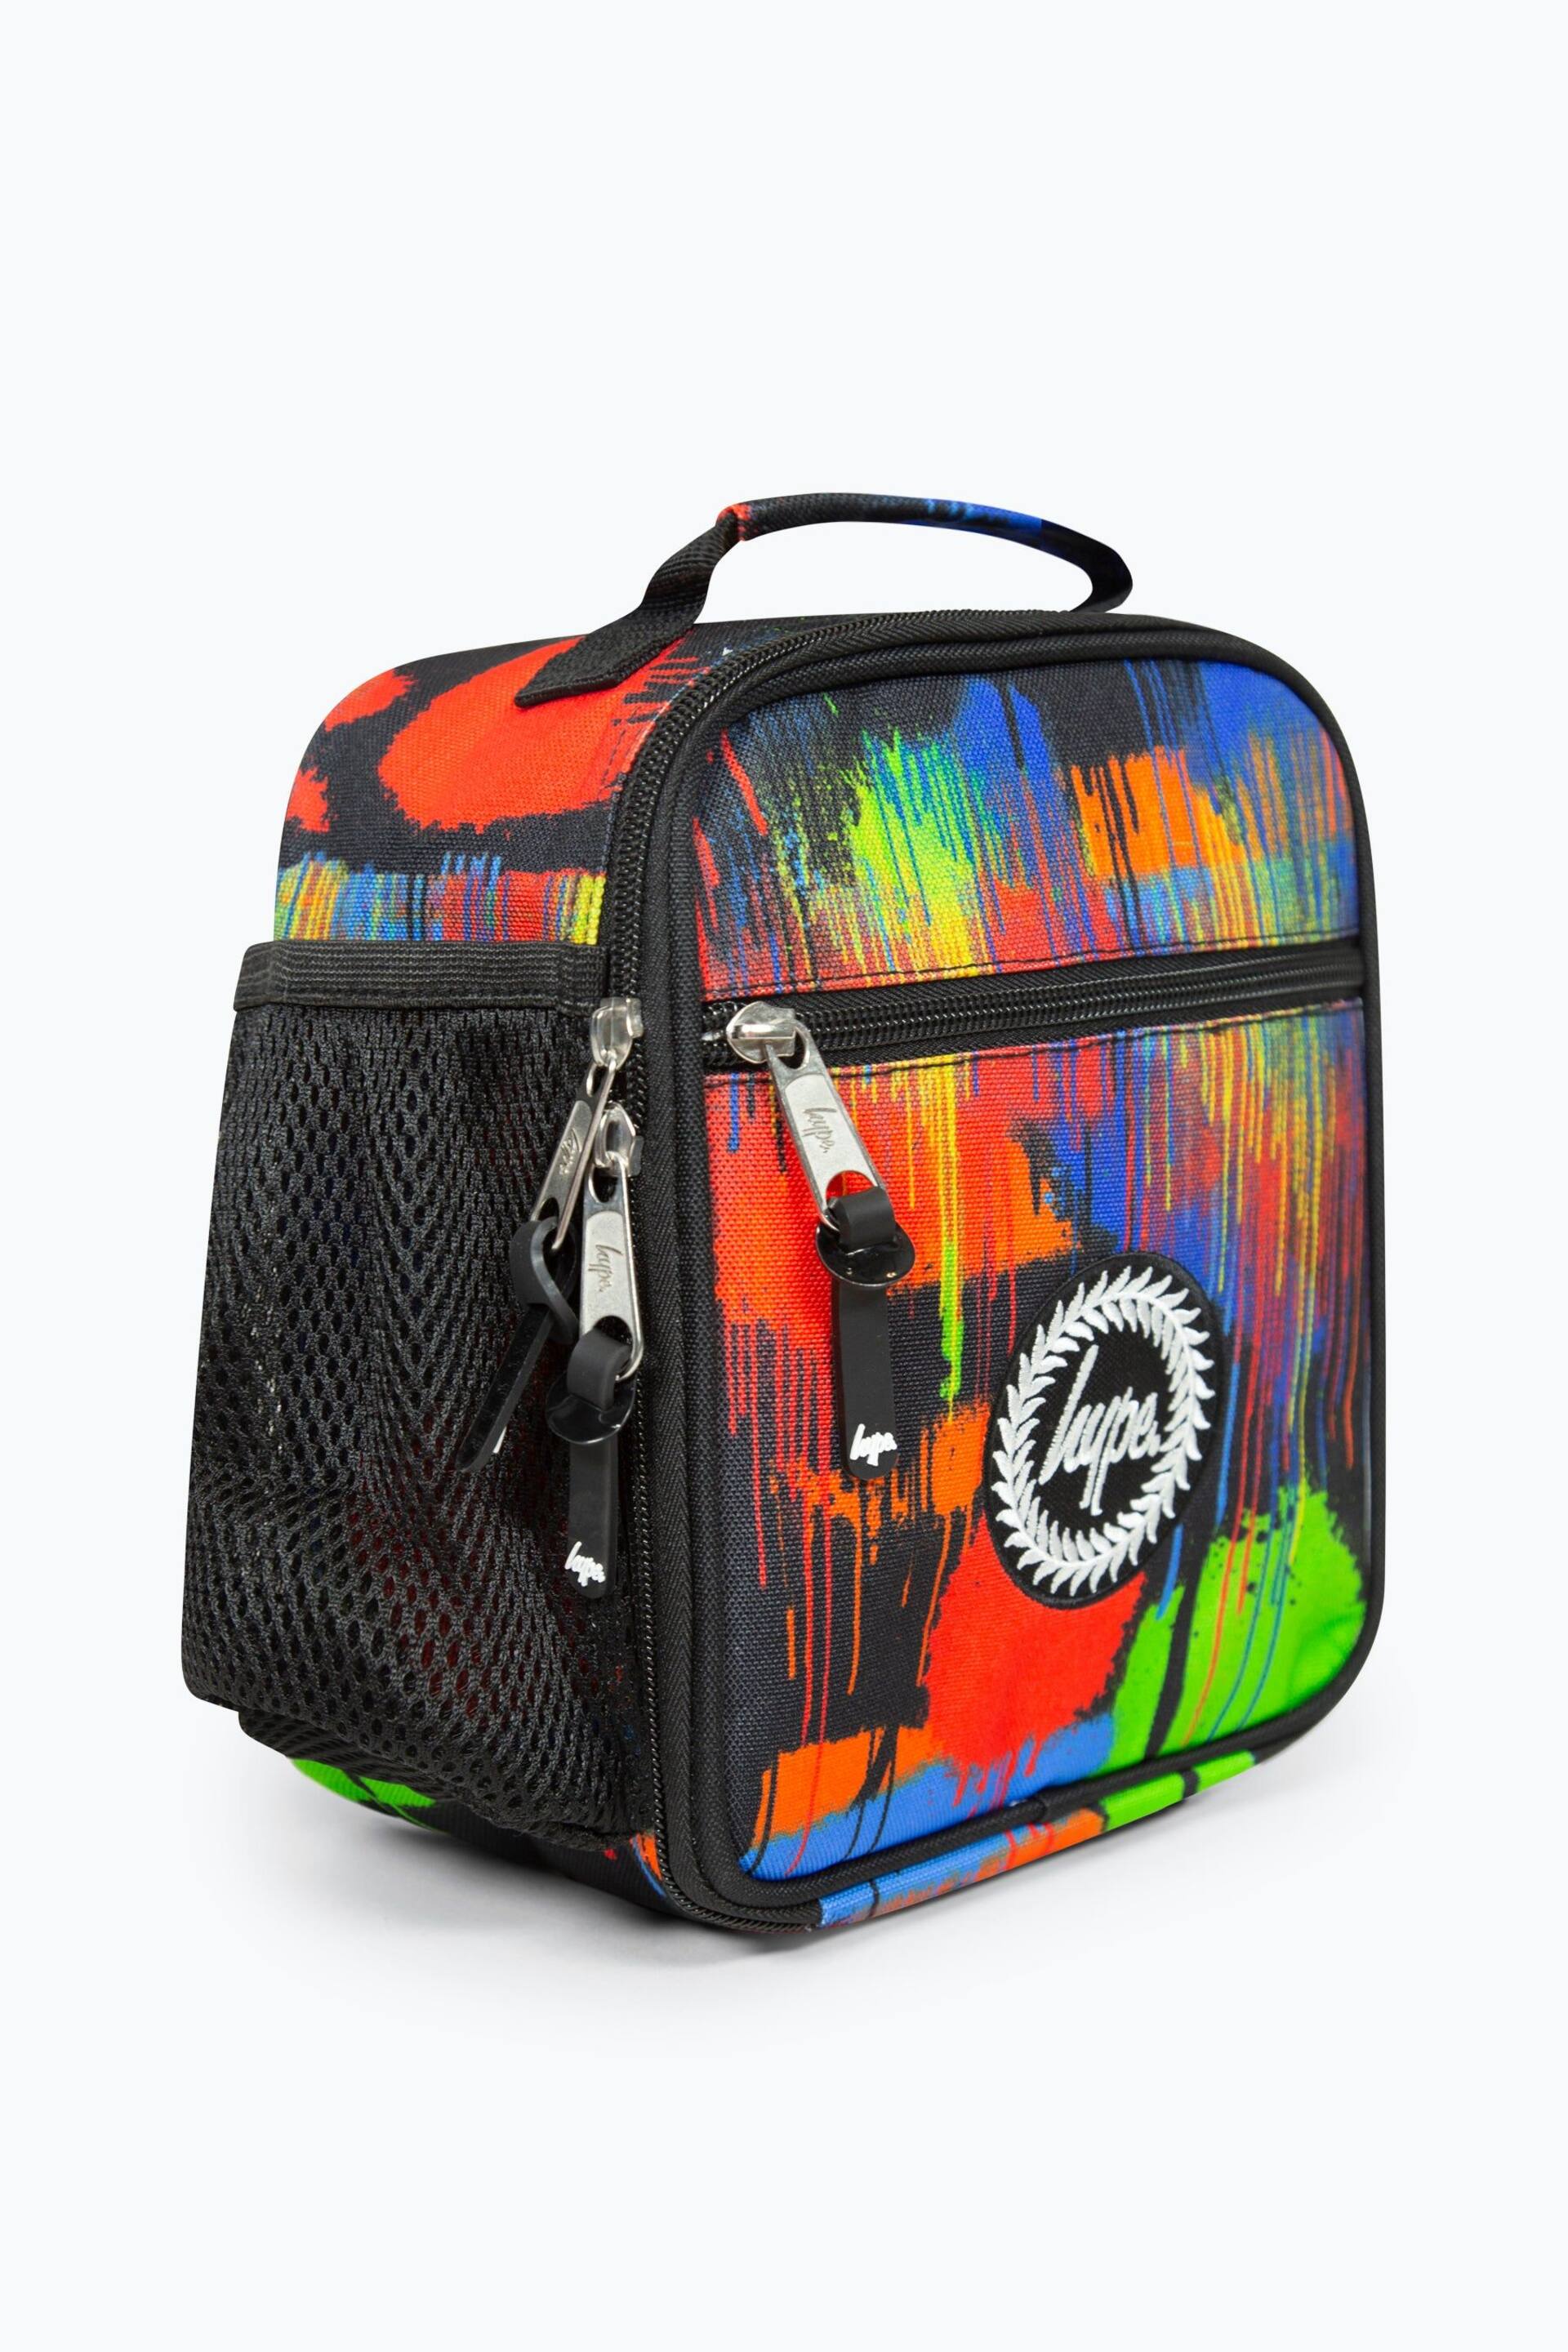 Hype. Multi Spray Paint Lunch Box - Image 3 of 8